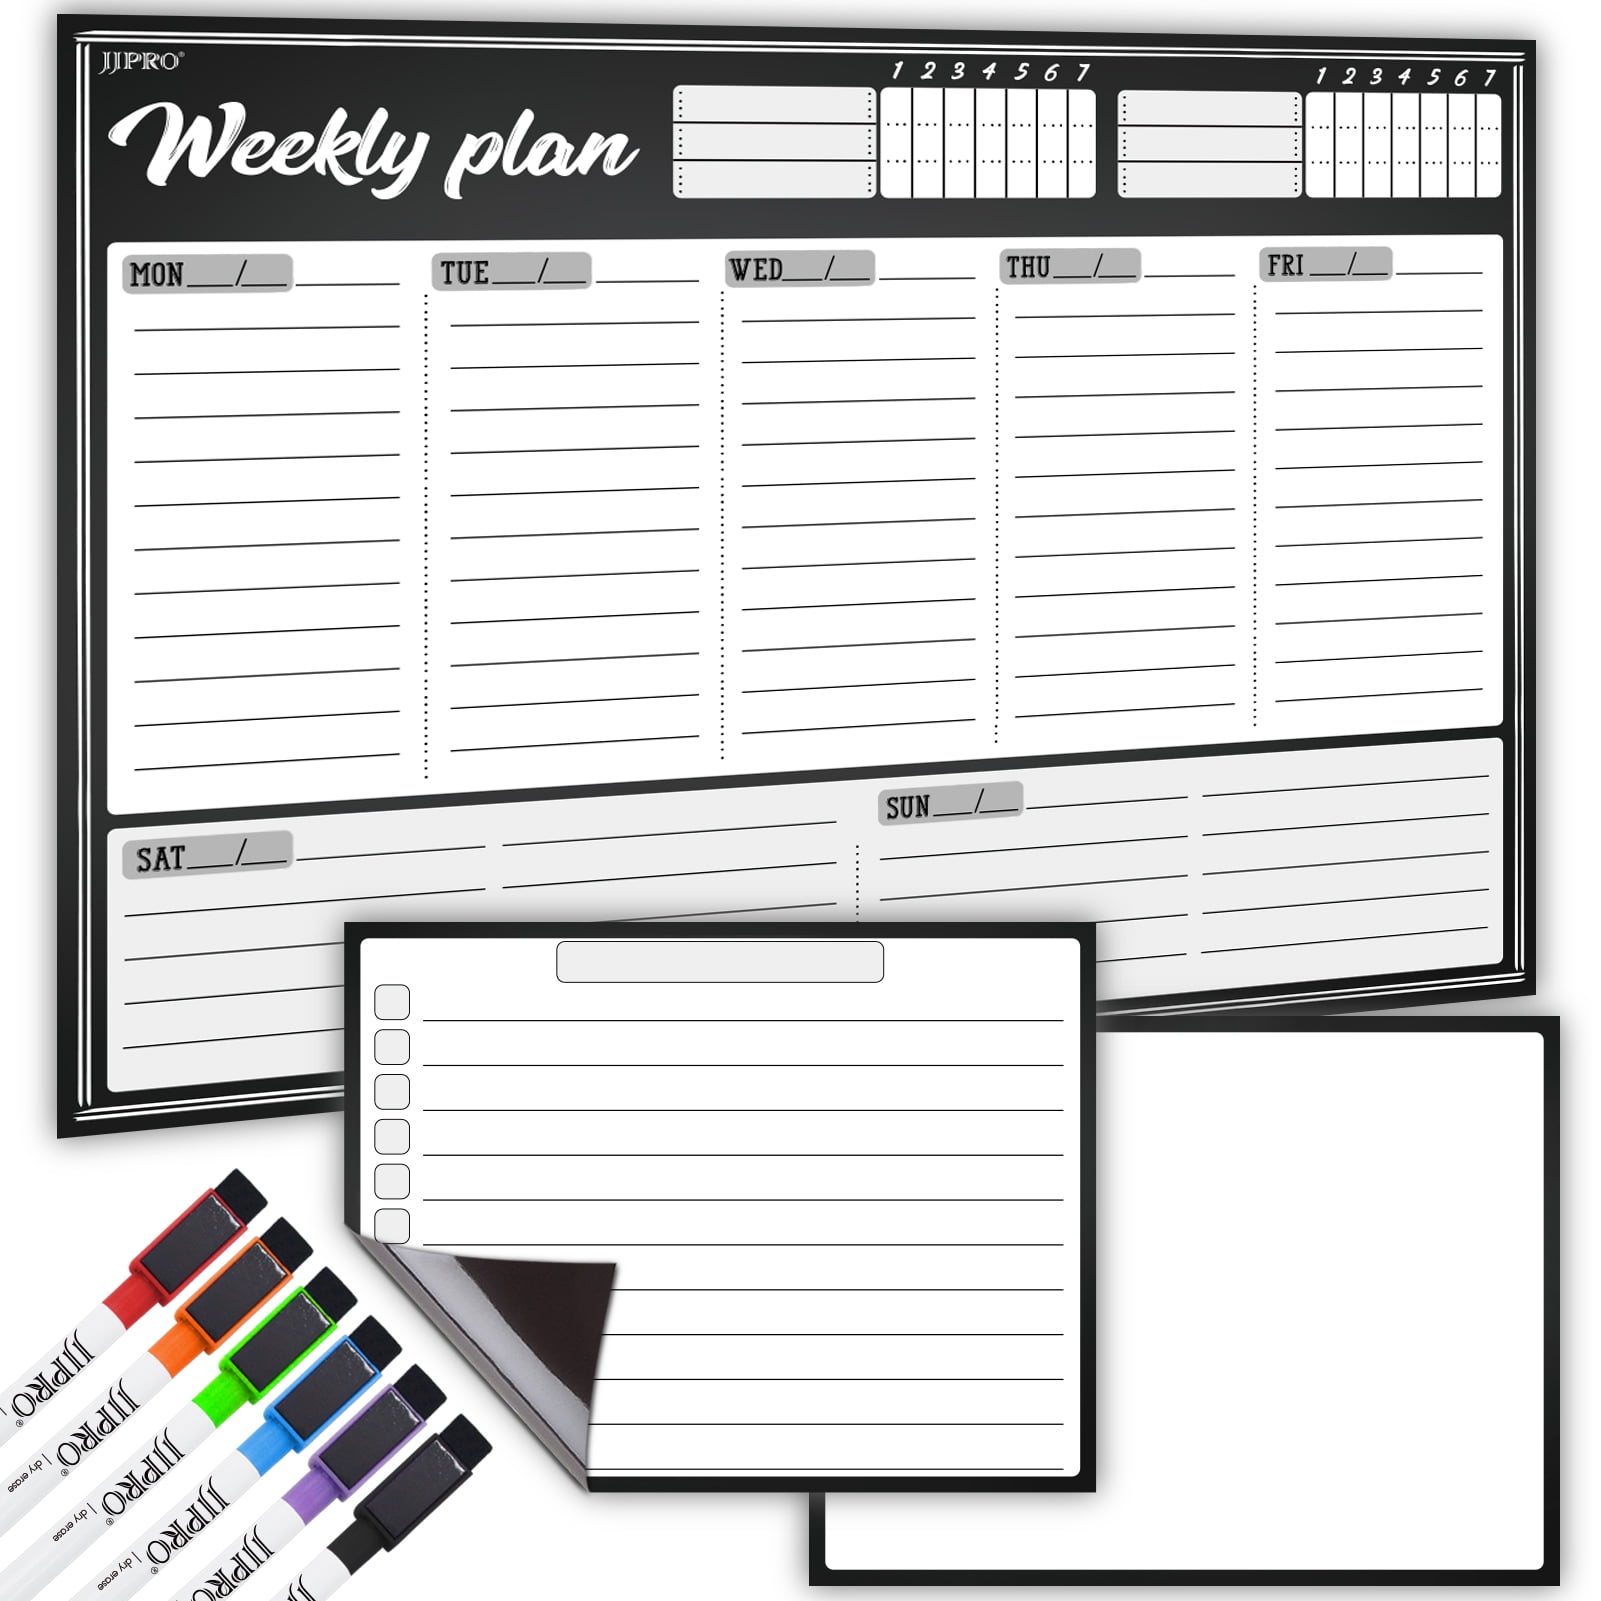 Two Bonus Dry Erase Notes/to Do/Grocery Whiteboards and 6 Magnetic Extra Fine Tips Dry Erase Markers Included! One Reusable Weekly Planner Magnetic Dry Erase Weekly Planner for Fridge Set 